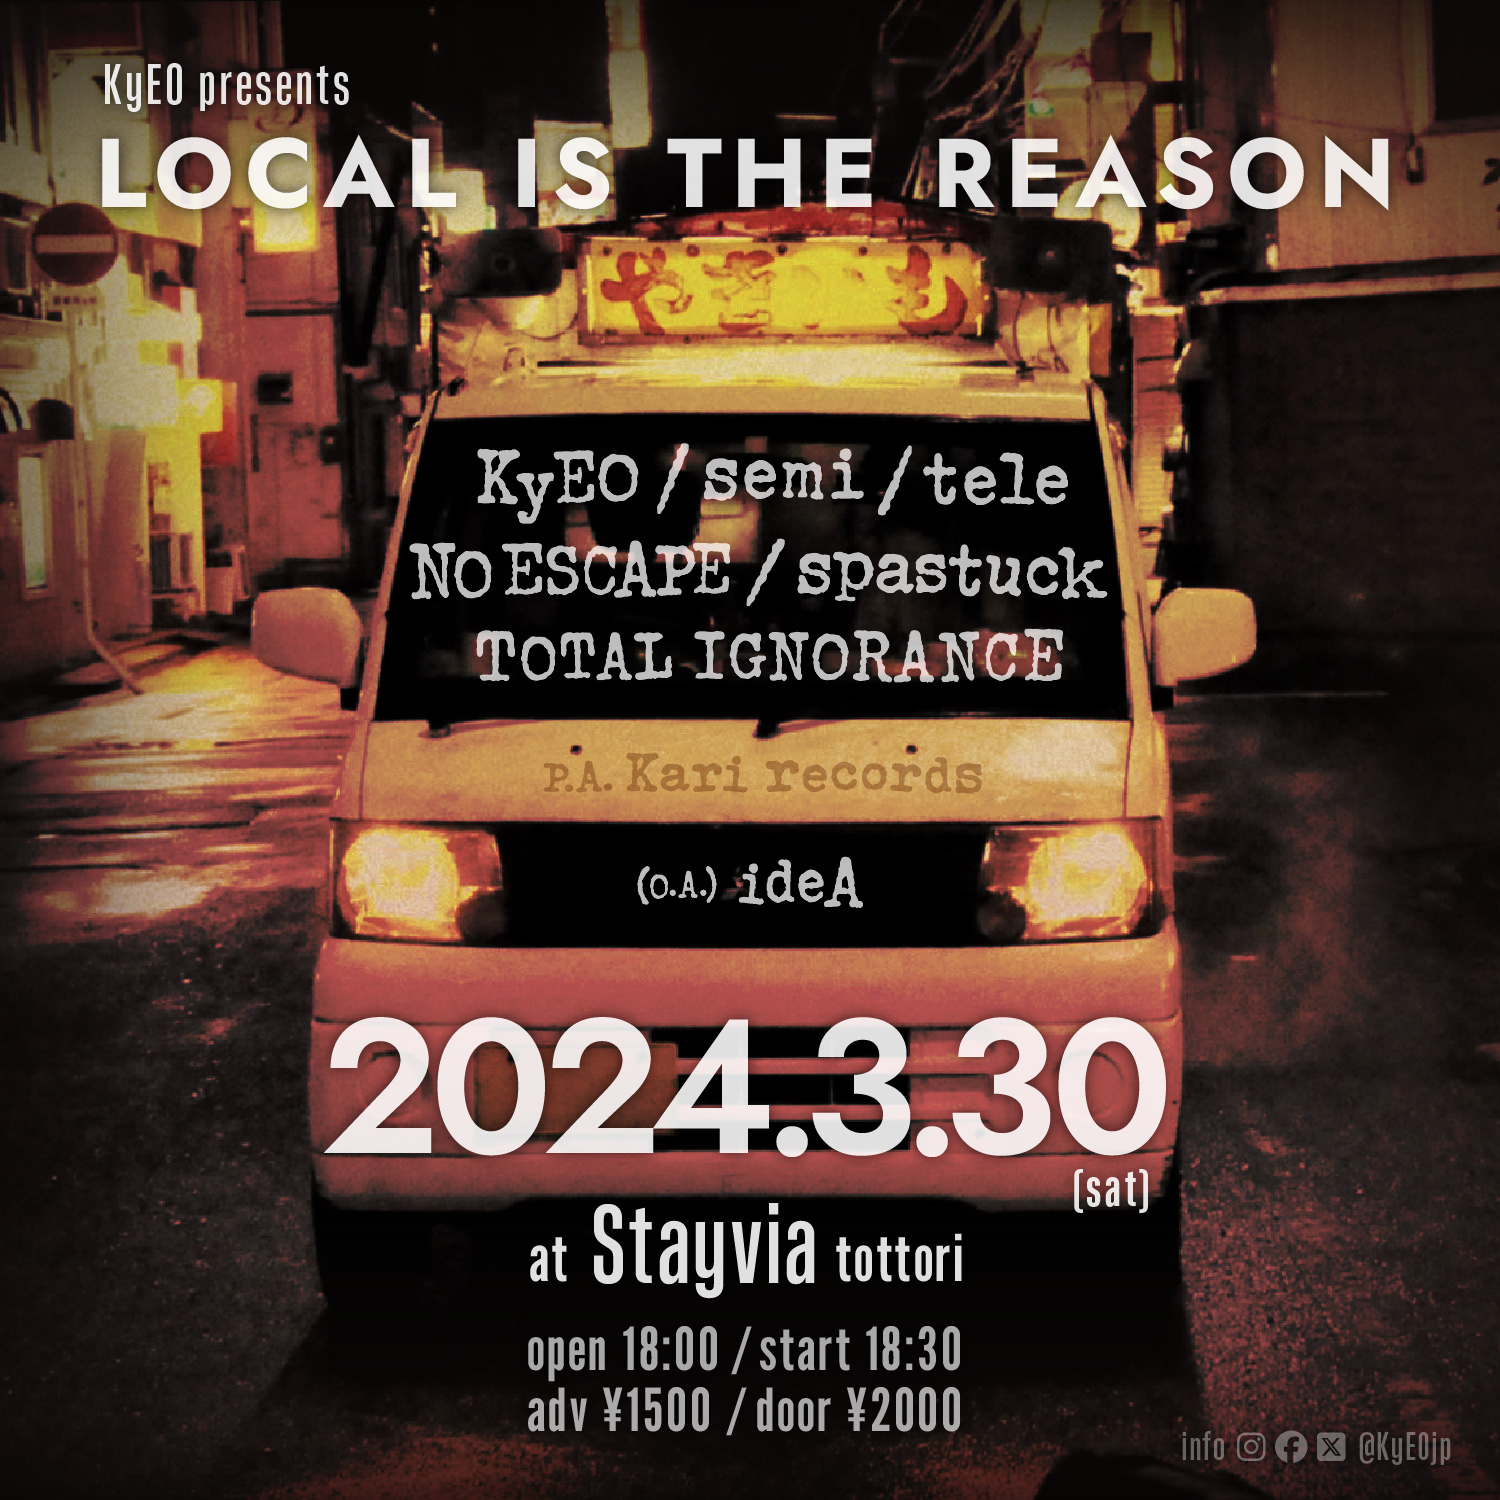 KyEO presents “LOCAL IS THE REASON”